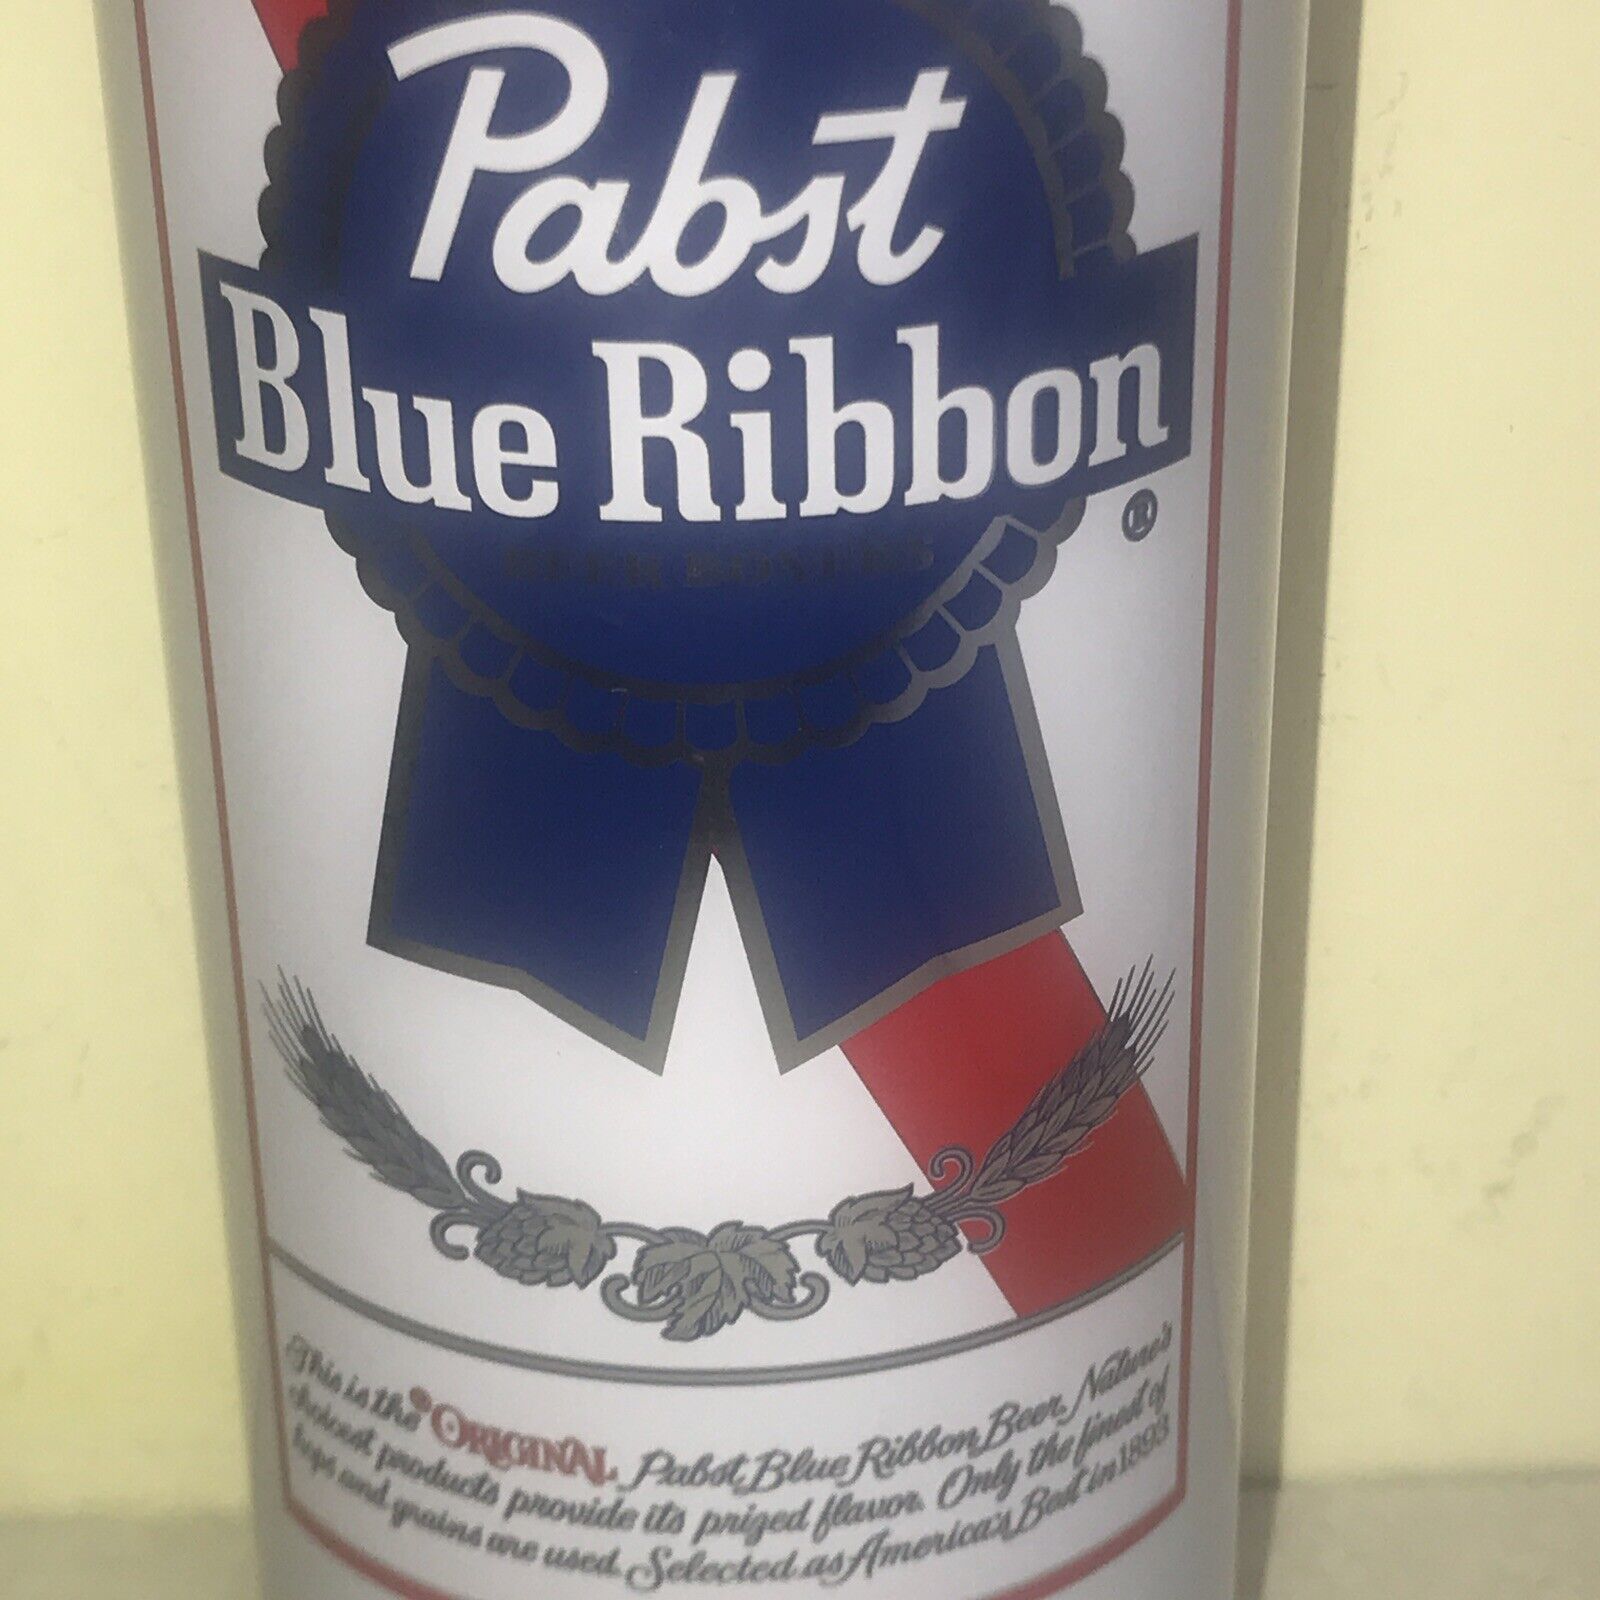 PBR Pabst Blue Ribbon Beer Lounge Pants in a can-SIZE SMALL S Swag Boxers Pabst Blue Ribbon - фотография #6